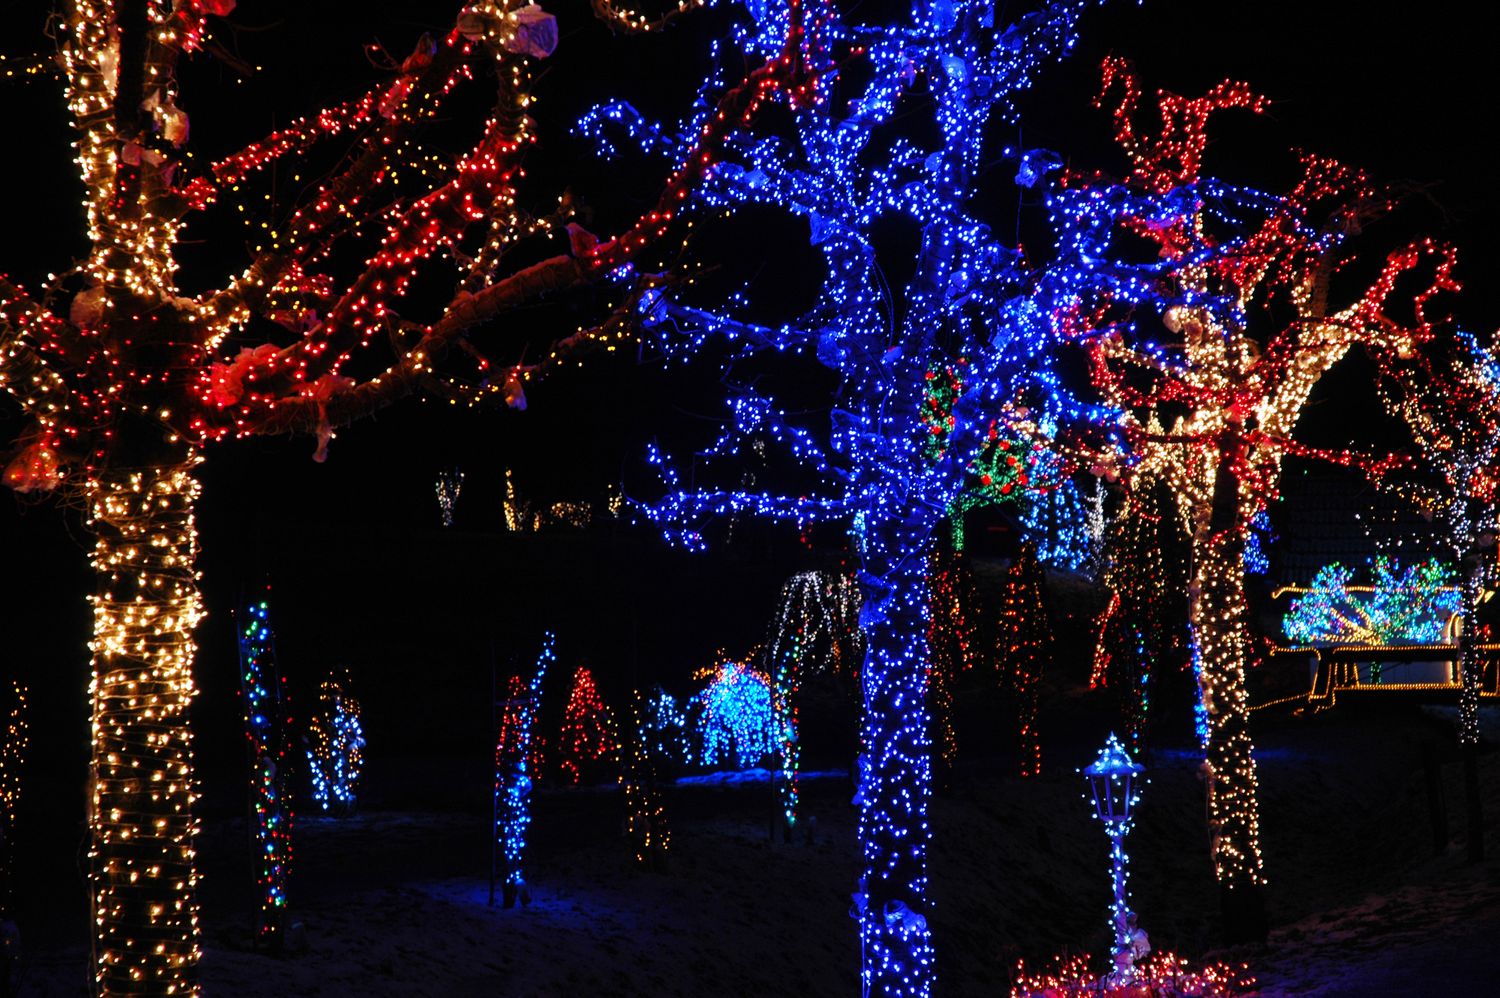 Where to Find the Best Christmas Light Displays in Indiana - TalkToTucker.com